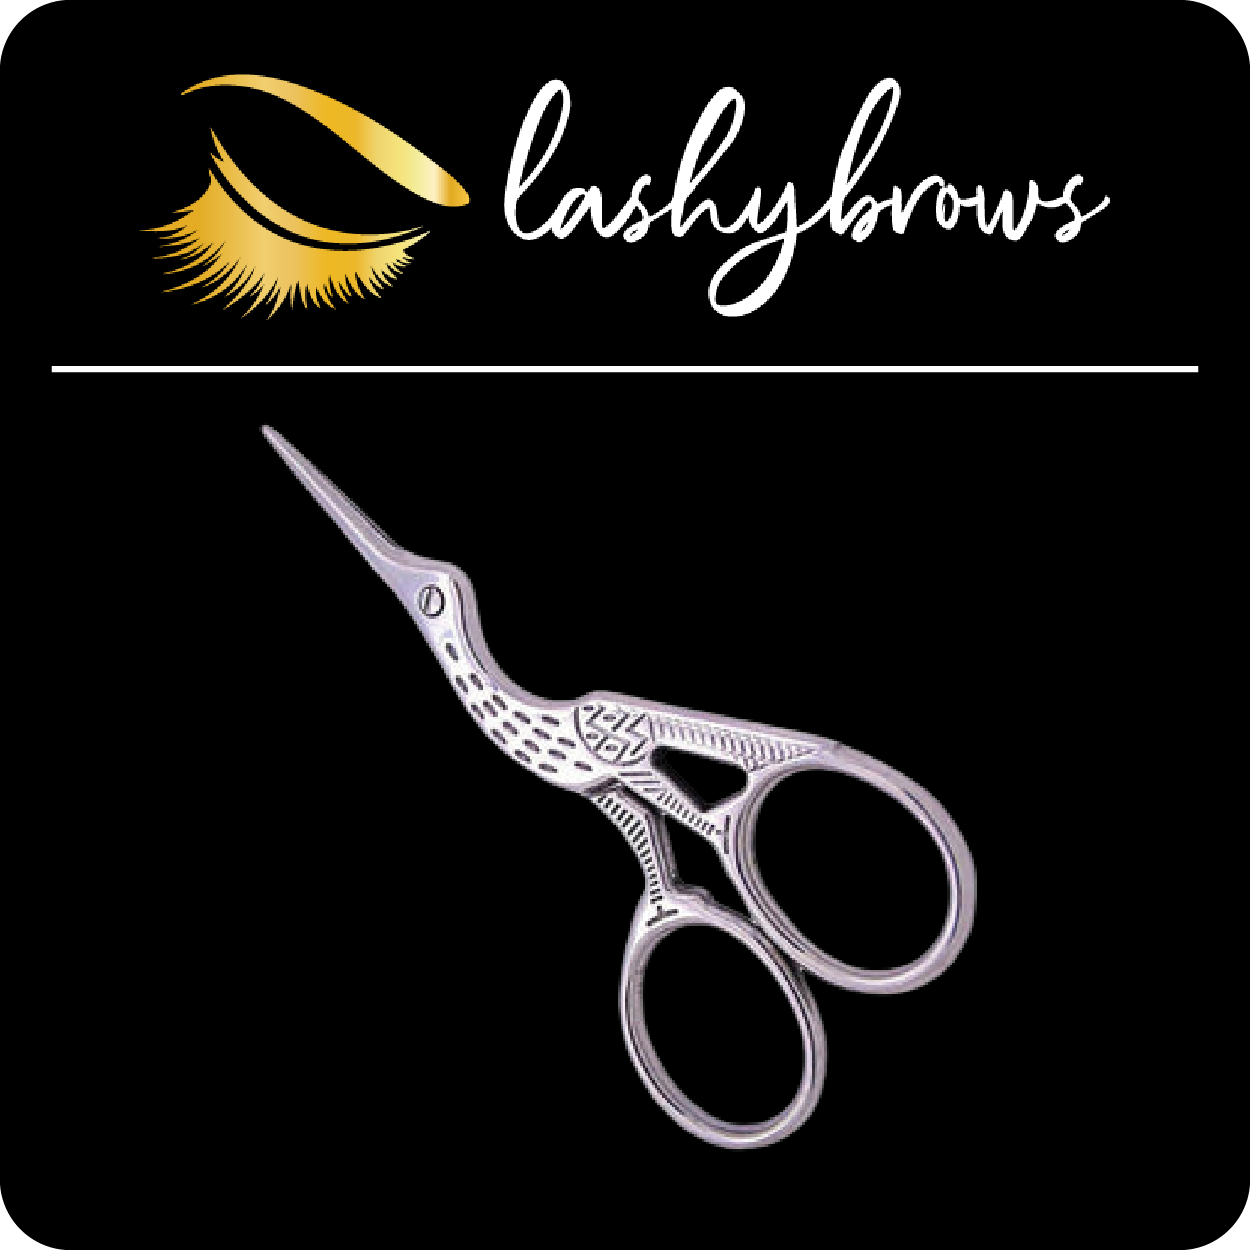 Eyebrow Shaping Scissors Stainless Steel (1pcs)